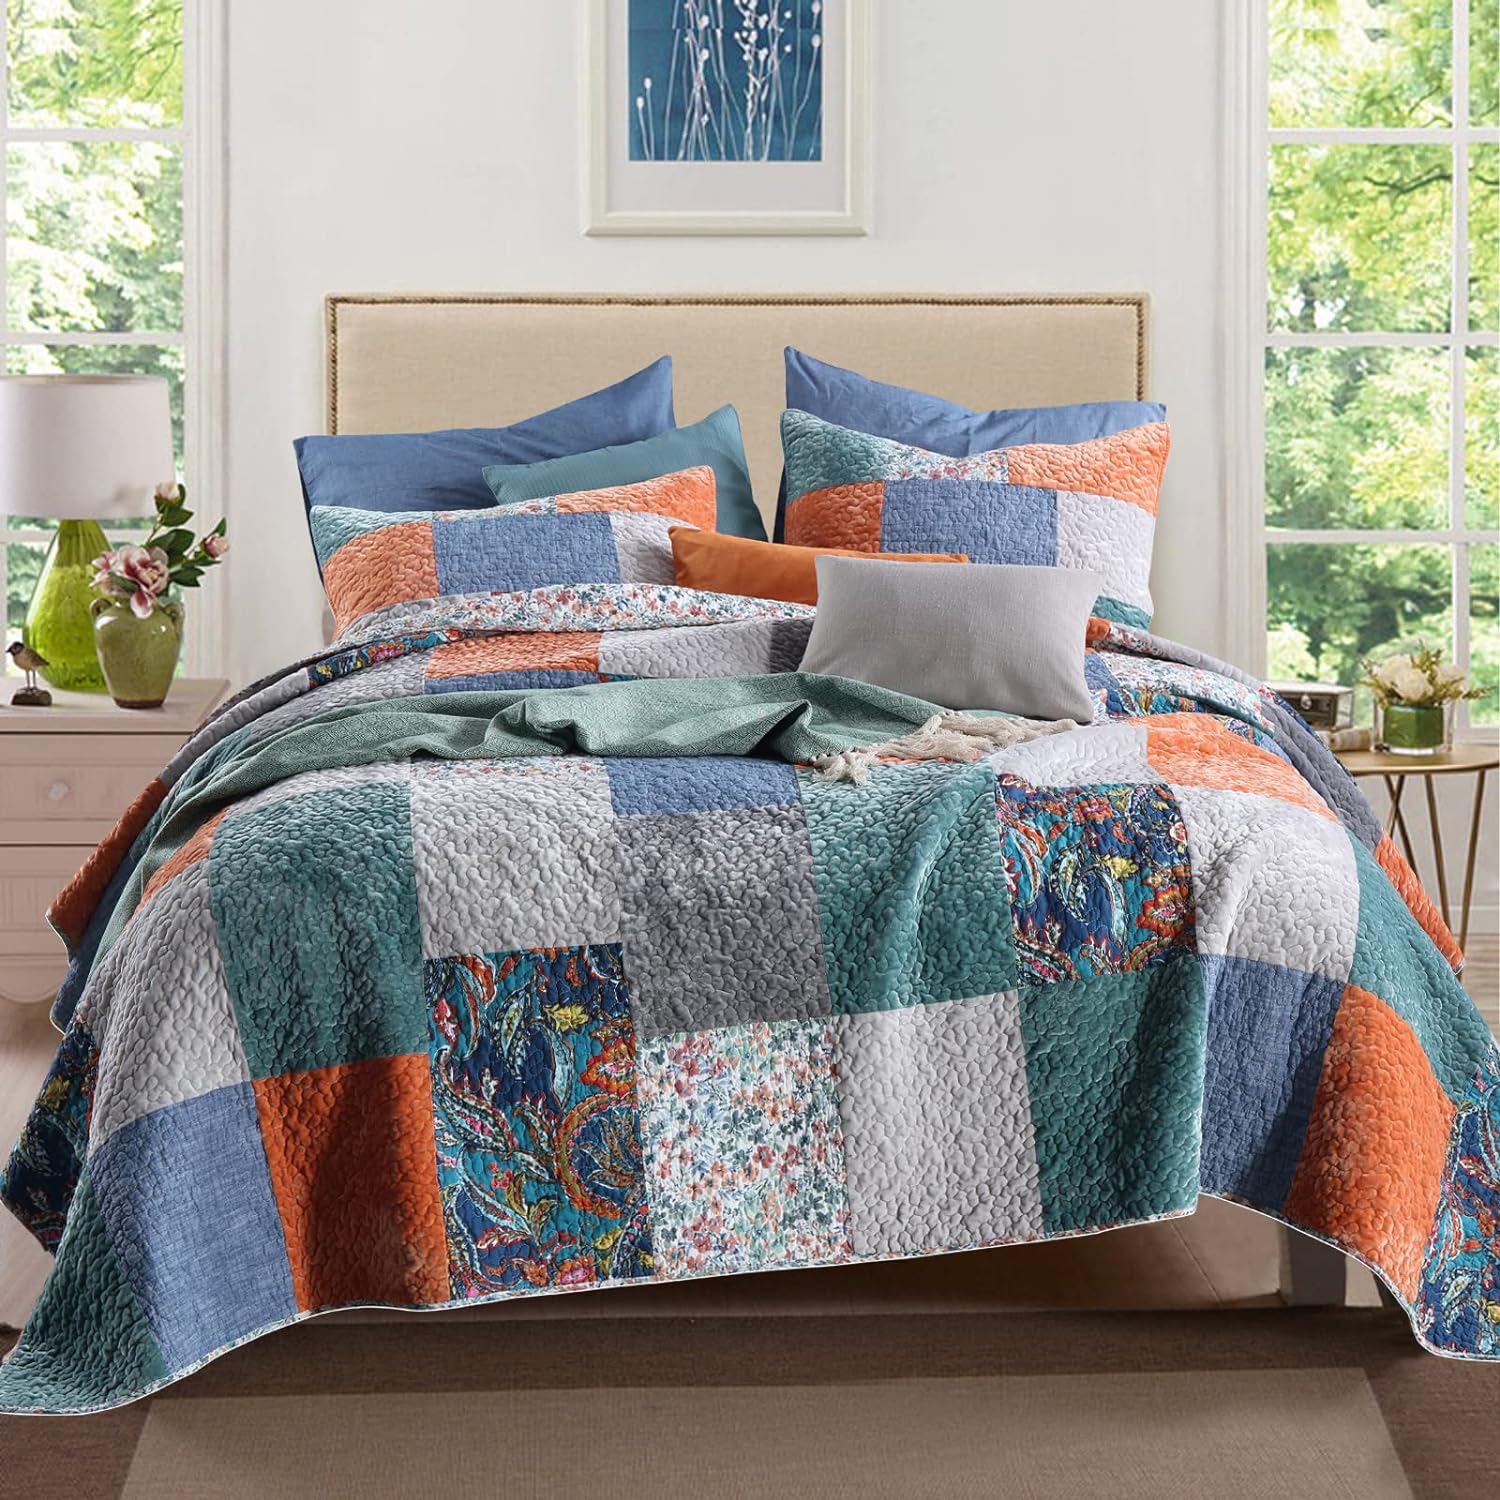 Yvooxny California King Quilt Set - Bohemian Farmhouse Patchwork Floral  Pattern, Reversible Green, 110 x 118 Inch Quilt + 2 Pillowcases